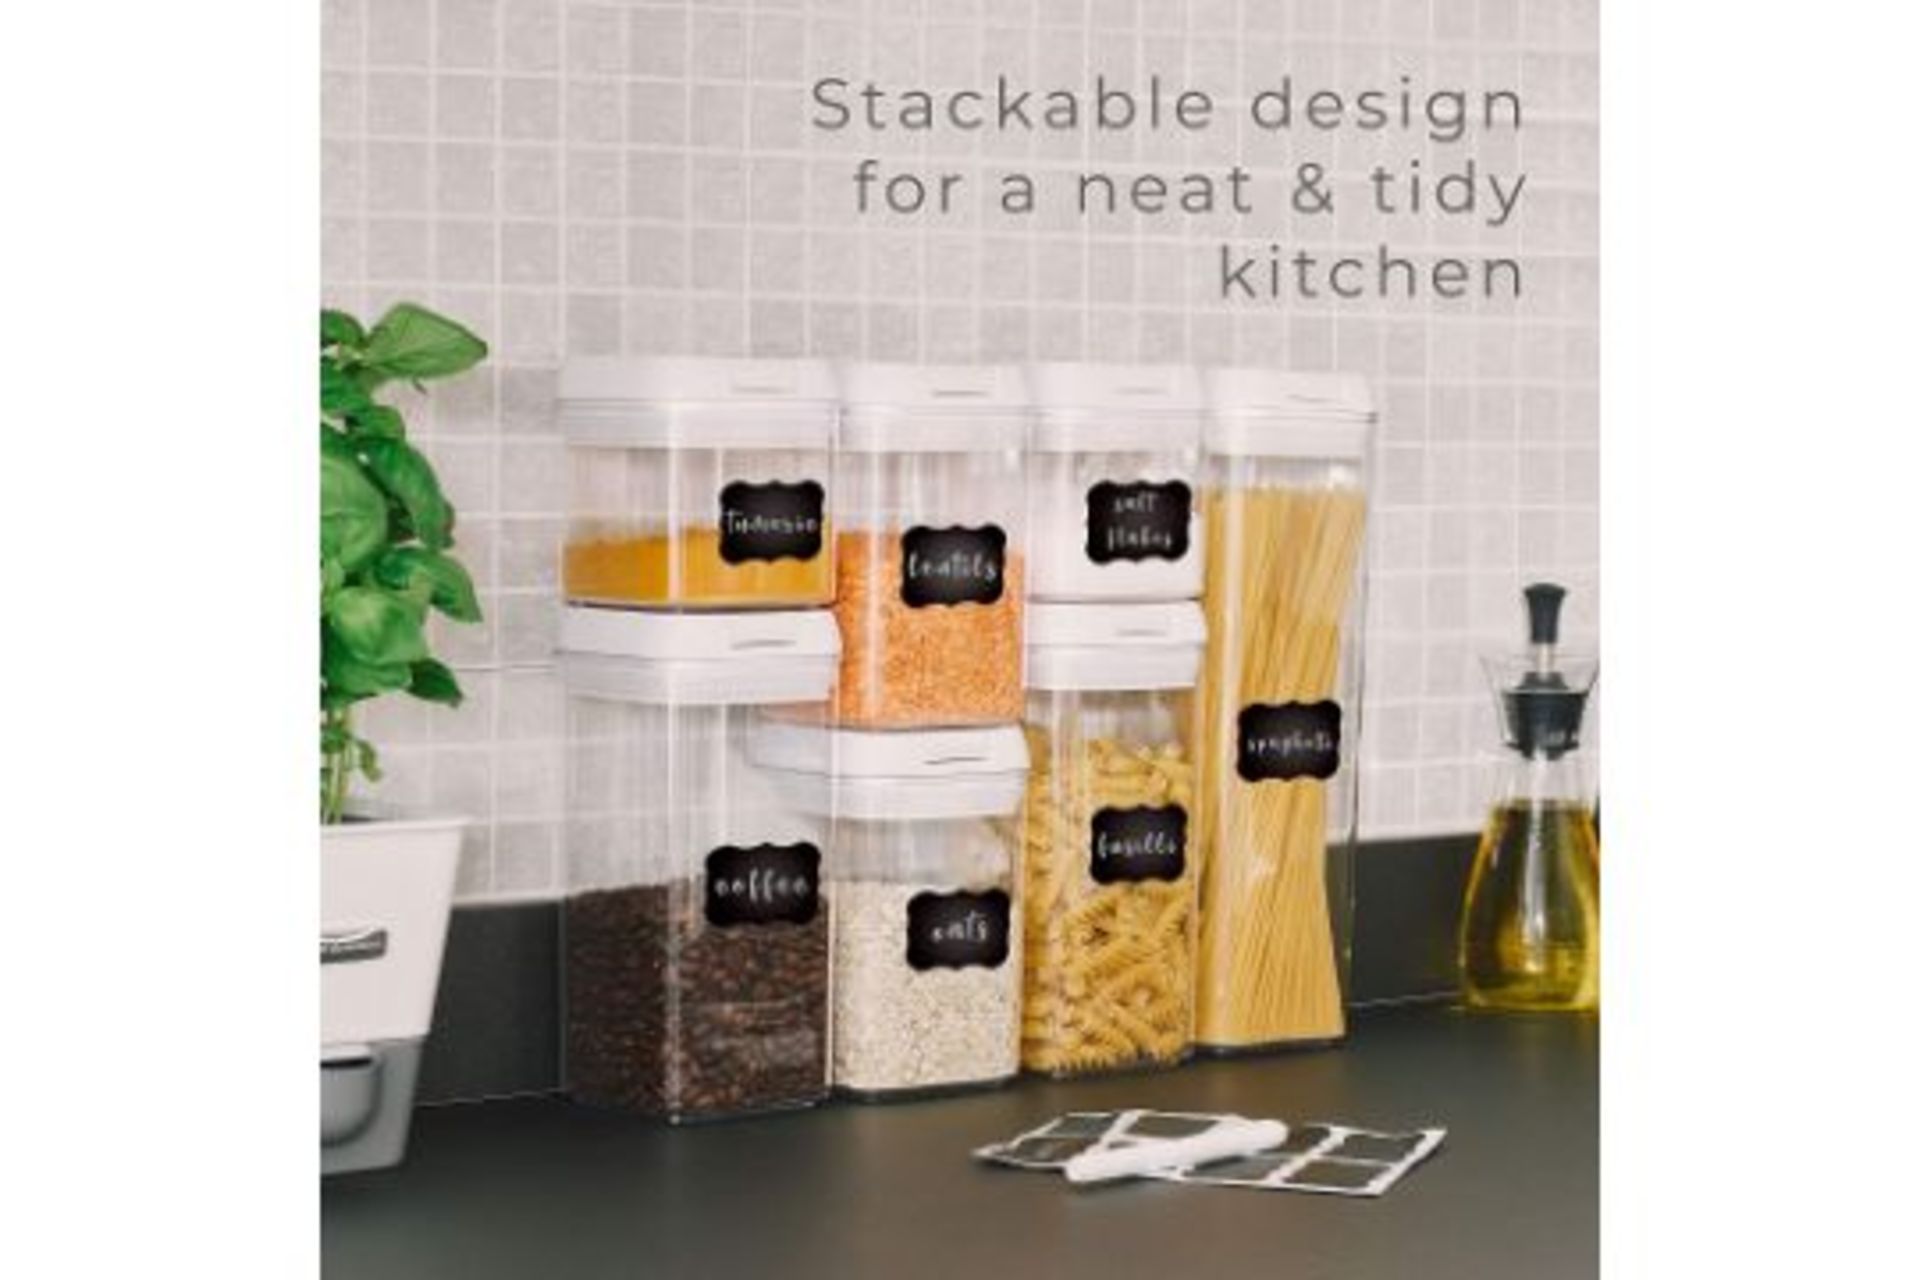 Pallet To Contain 60 x New Boxed George Olivier Sets of 7 Food Storage Containers |Kitchen Storage - Image 4 of 4